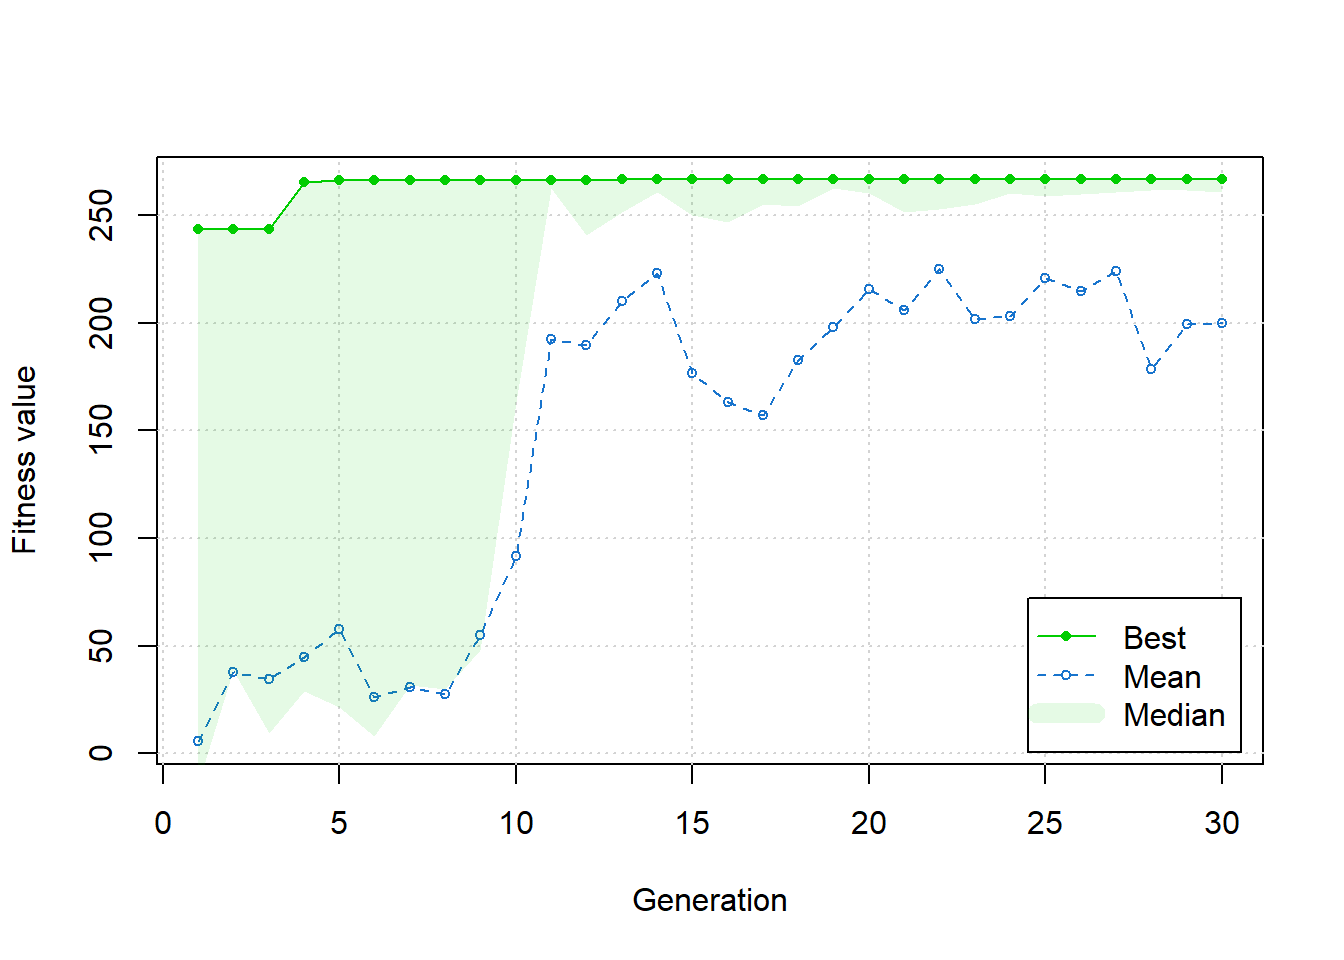 Line of best fit and mean on a graph with x-axis 'Generation' and y-axis 'Fitness value' obtained through simulated annealing.